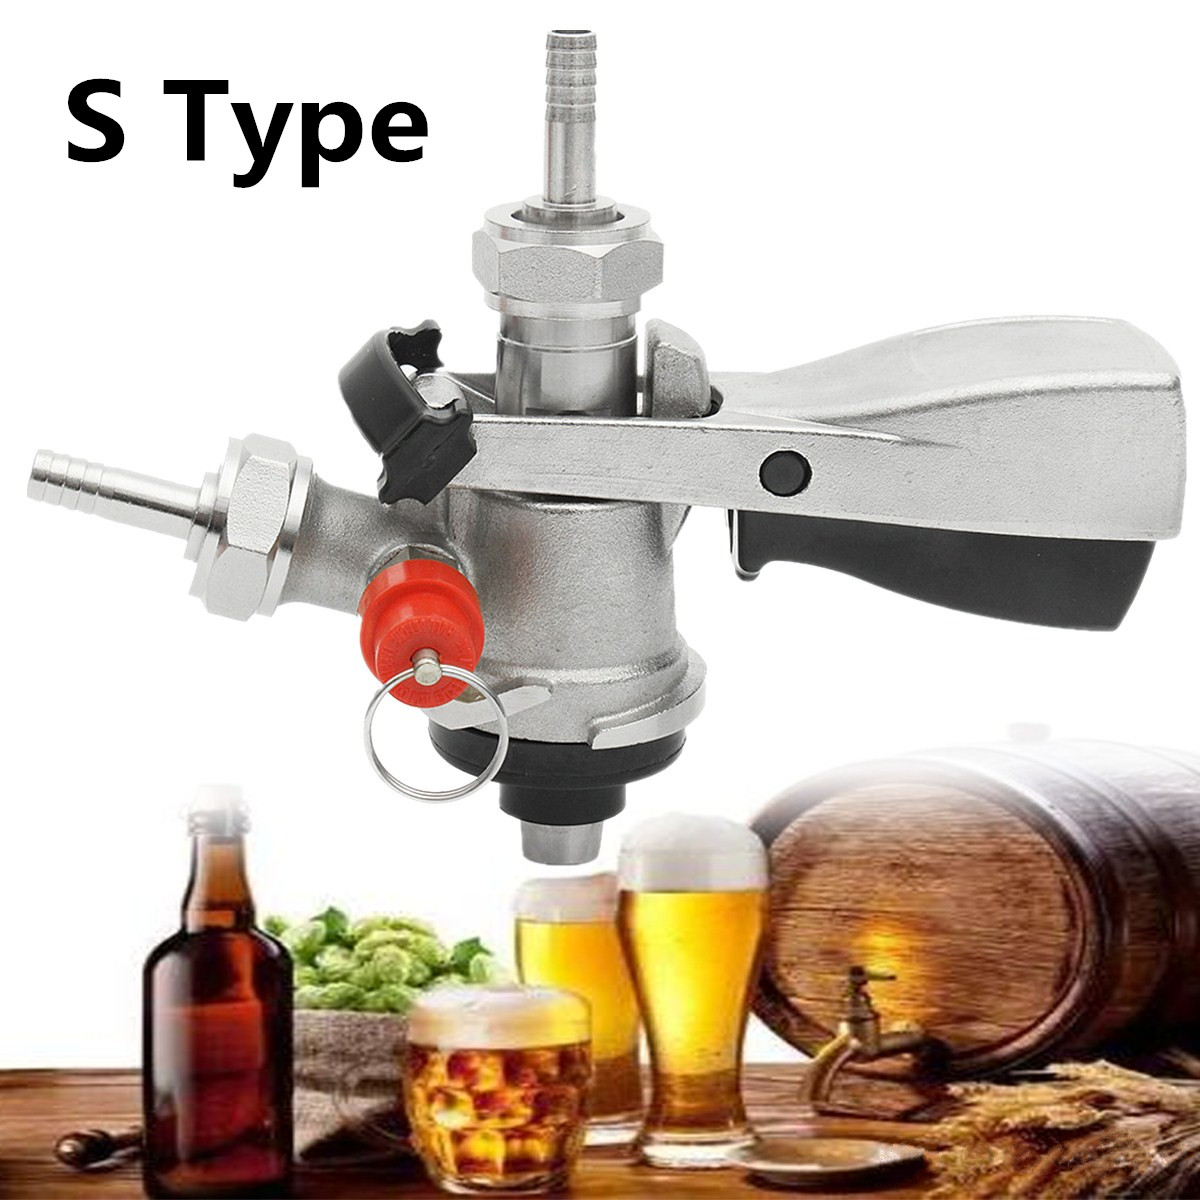 Stainless-Steel-S-type-Keg-Coupler-Draft-Beer-Dispenser-For-Home-Brew-with-Clicket-1139153-3